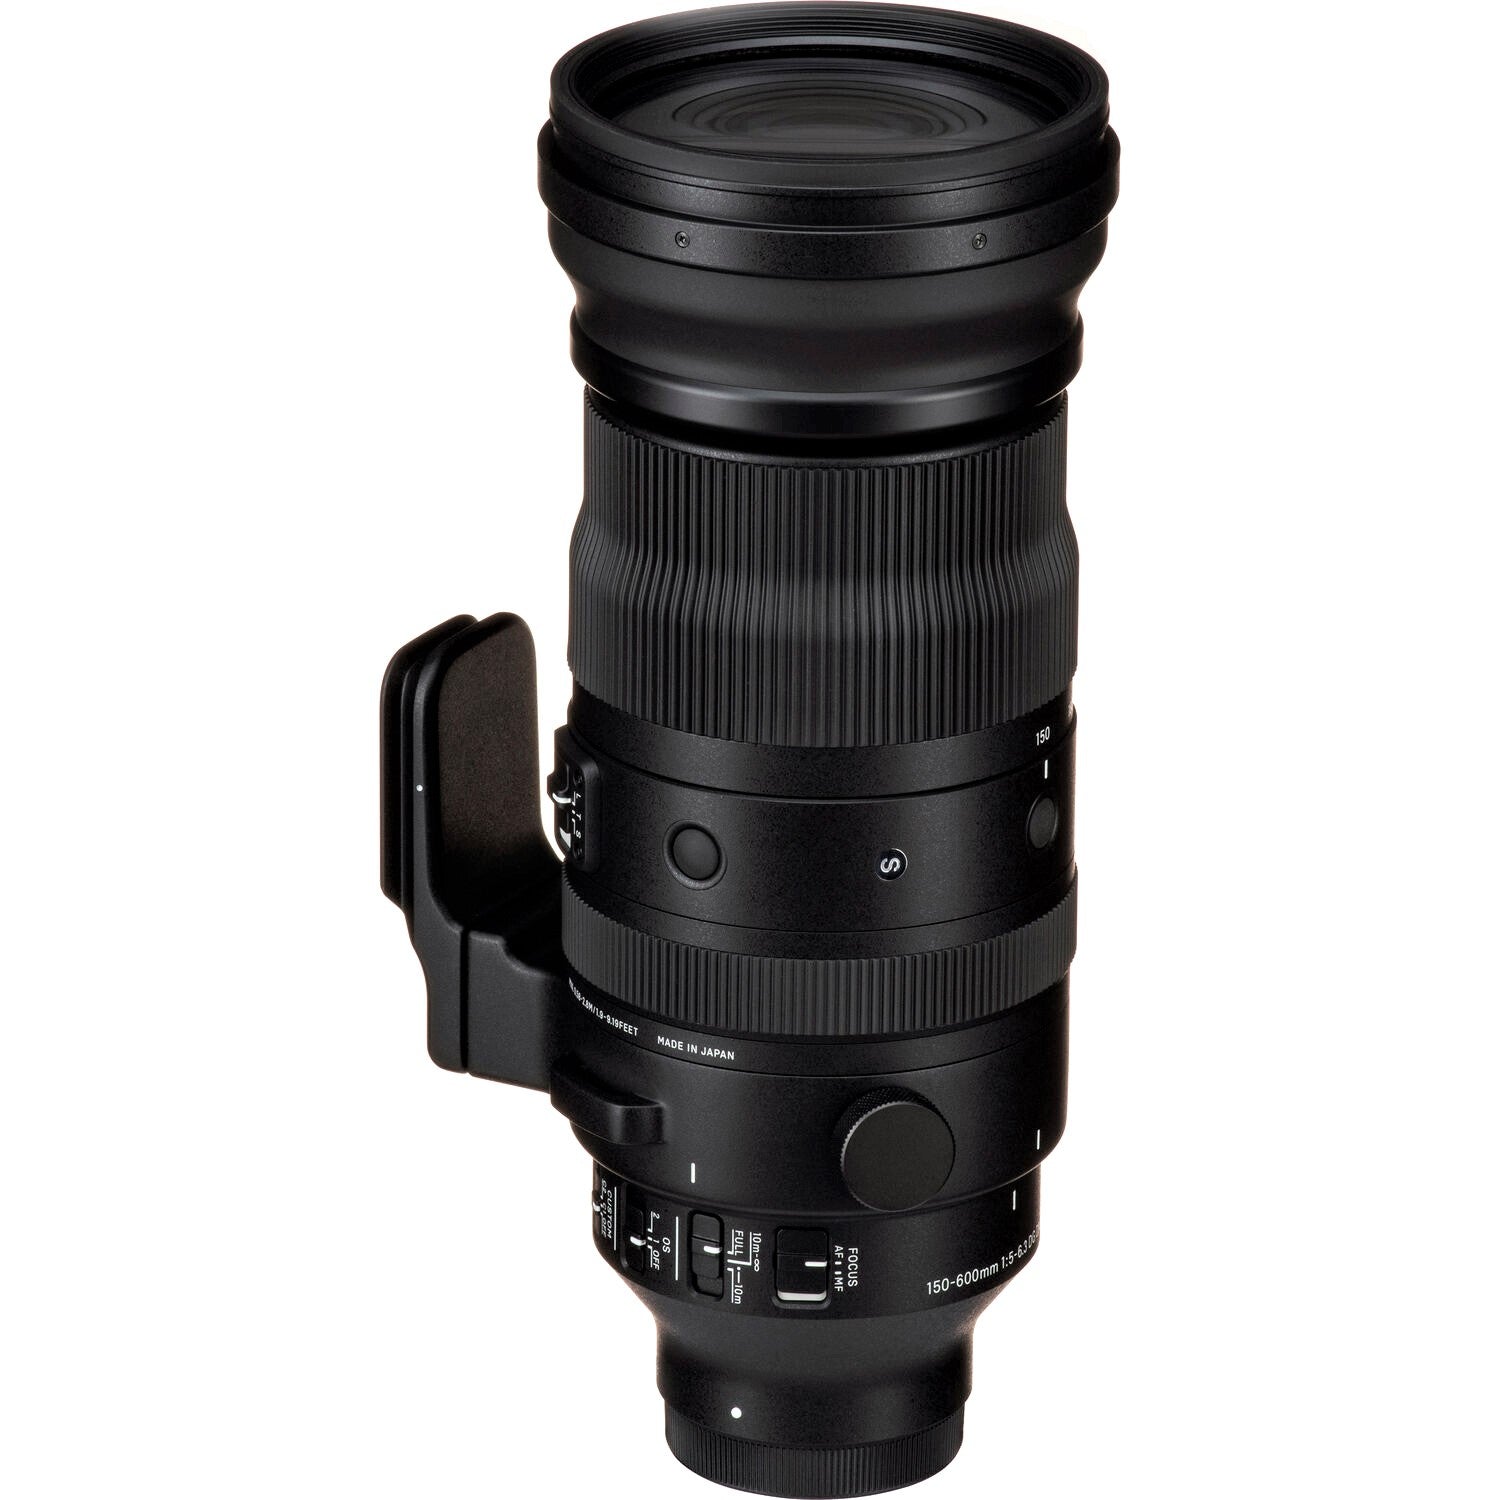 Sigma 150-600mm F5-6.3 DG DN OS Sports Lens (Sony E Mount) with Attached Tripod Socket on the Left Side